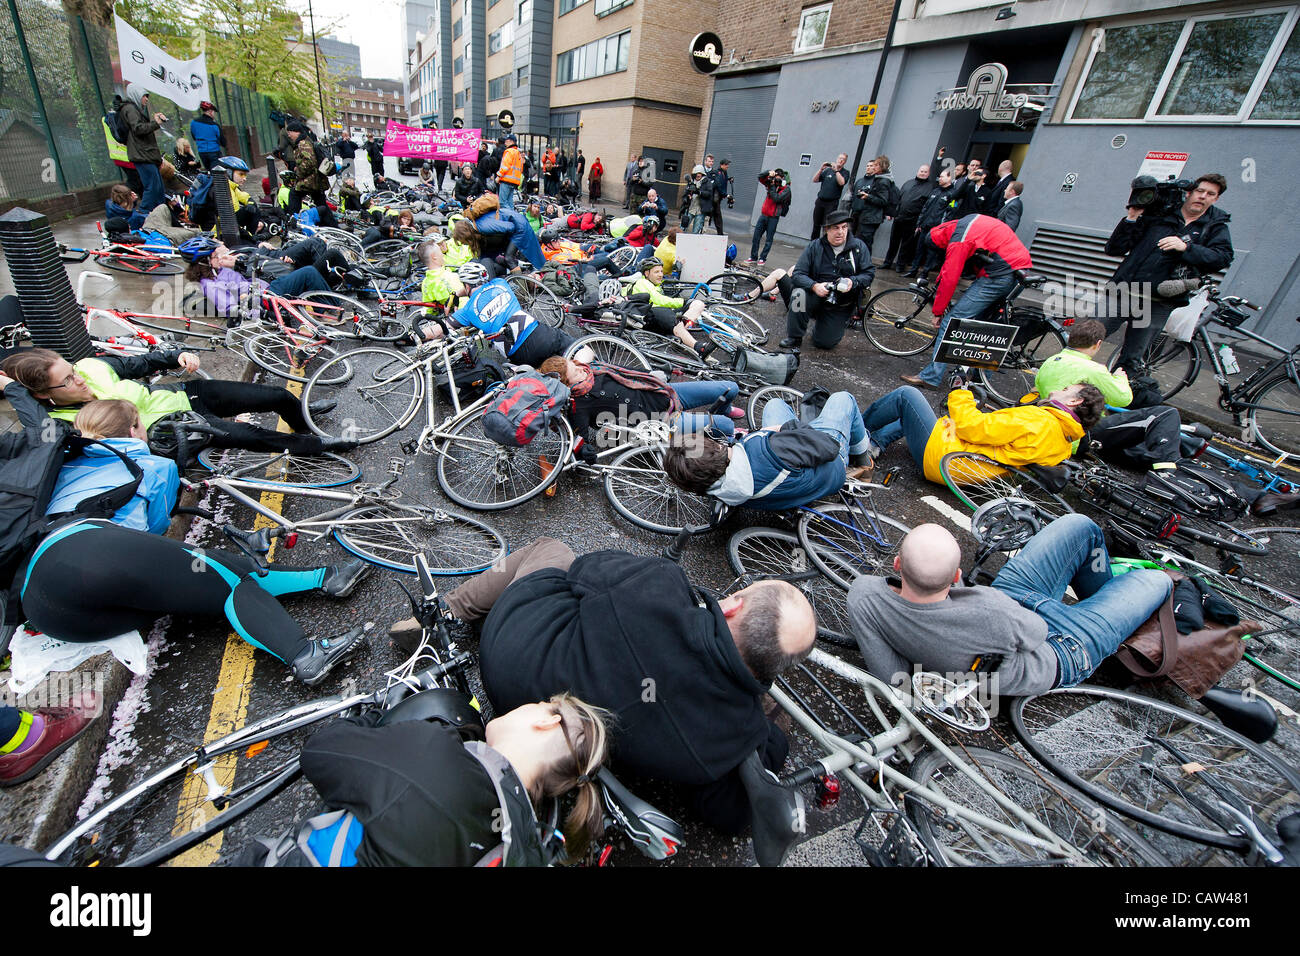 A mass 'die-in' outside of Addison Lee's London offices. They try to talk to John Griffin to highlight the danger his drivers pose to cyclists if they follow his instructions to use the bus lanes. He comes out but cannot be heard by the crowd.  Stanhope Street, London, UK 23rd April 2012. Stock Photo